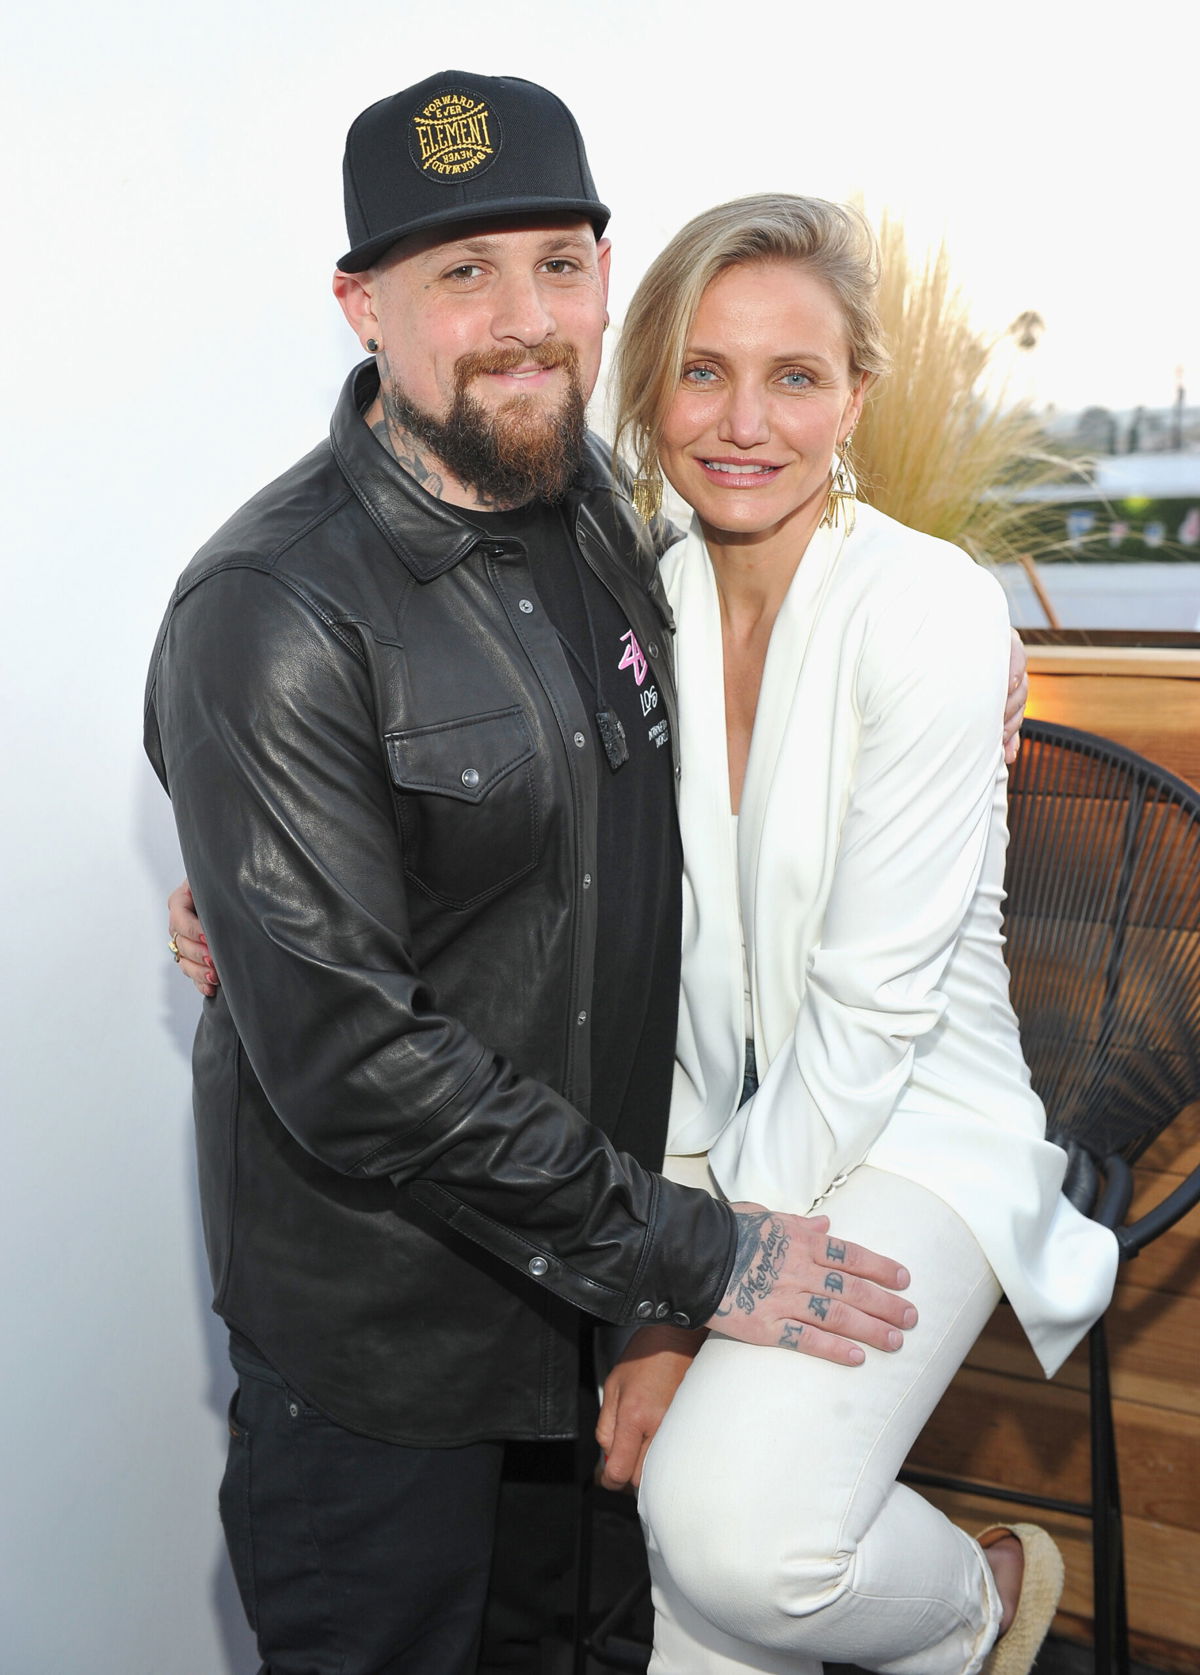 <i>Donato Sardella/Getty Images</i><br/>In honor of Benji Madden and Cameron Diaz's seventh wedding anniversary